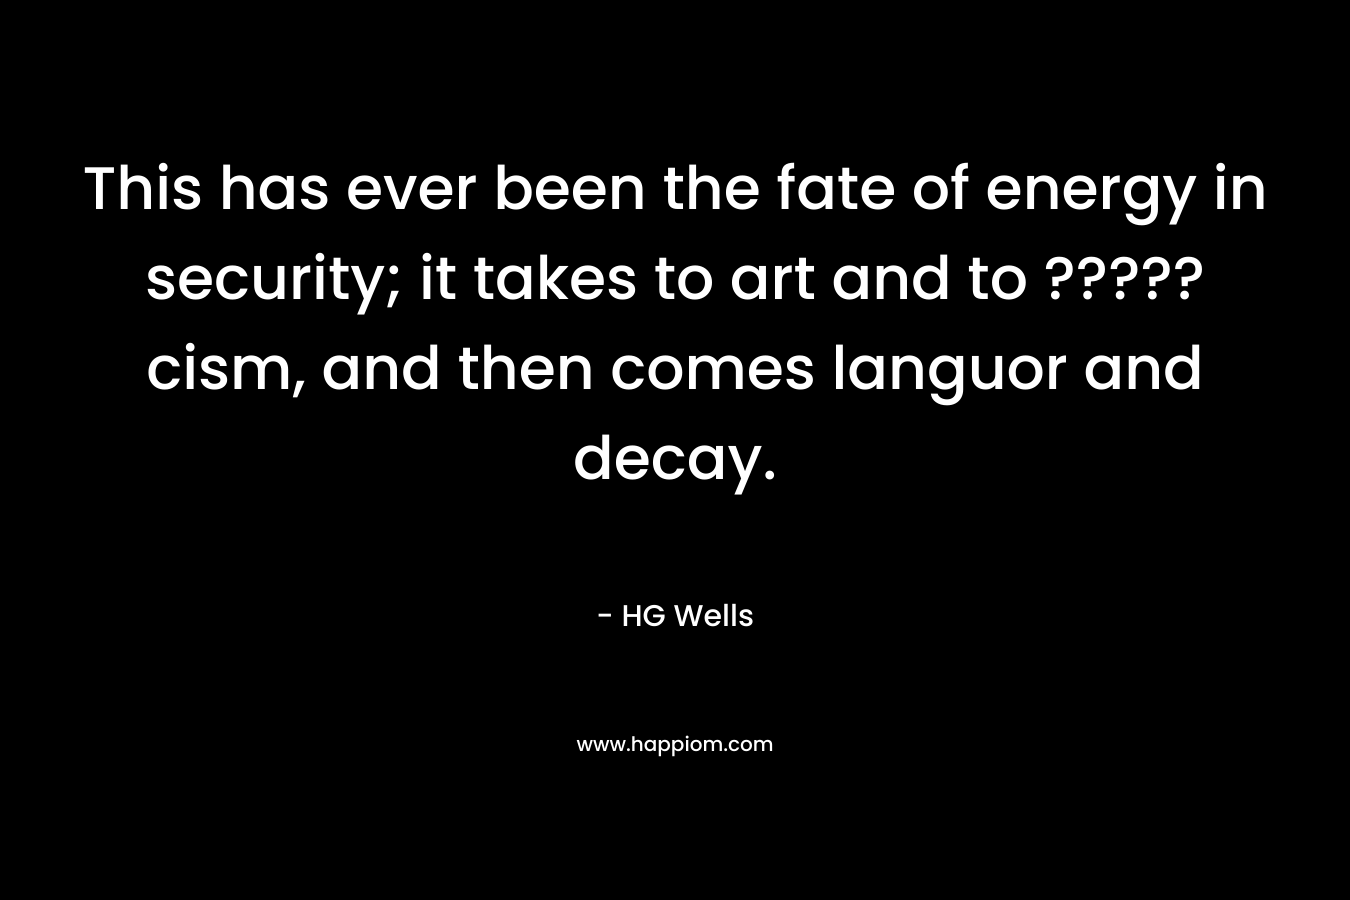 This has ever been the fate of energy in security; it takes to art and to ?????cism, and then comes languor and decay.